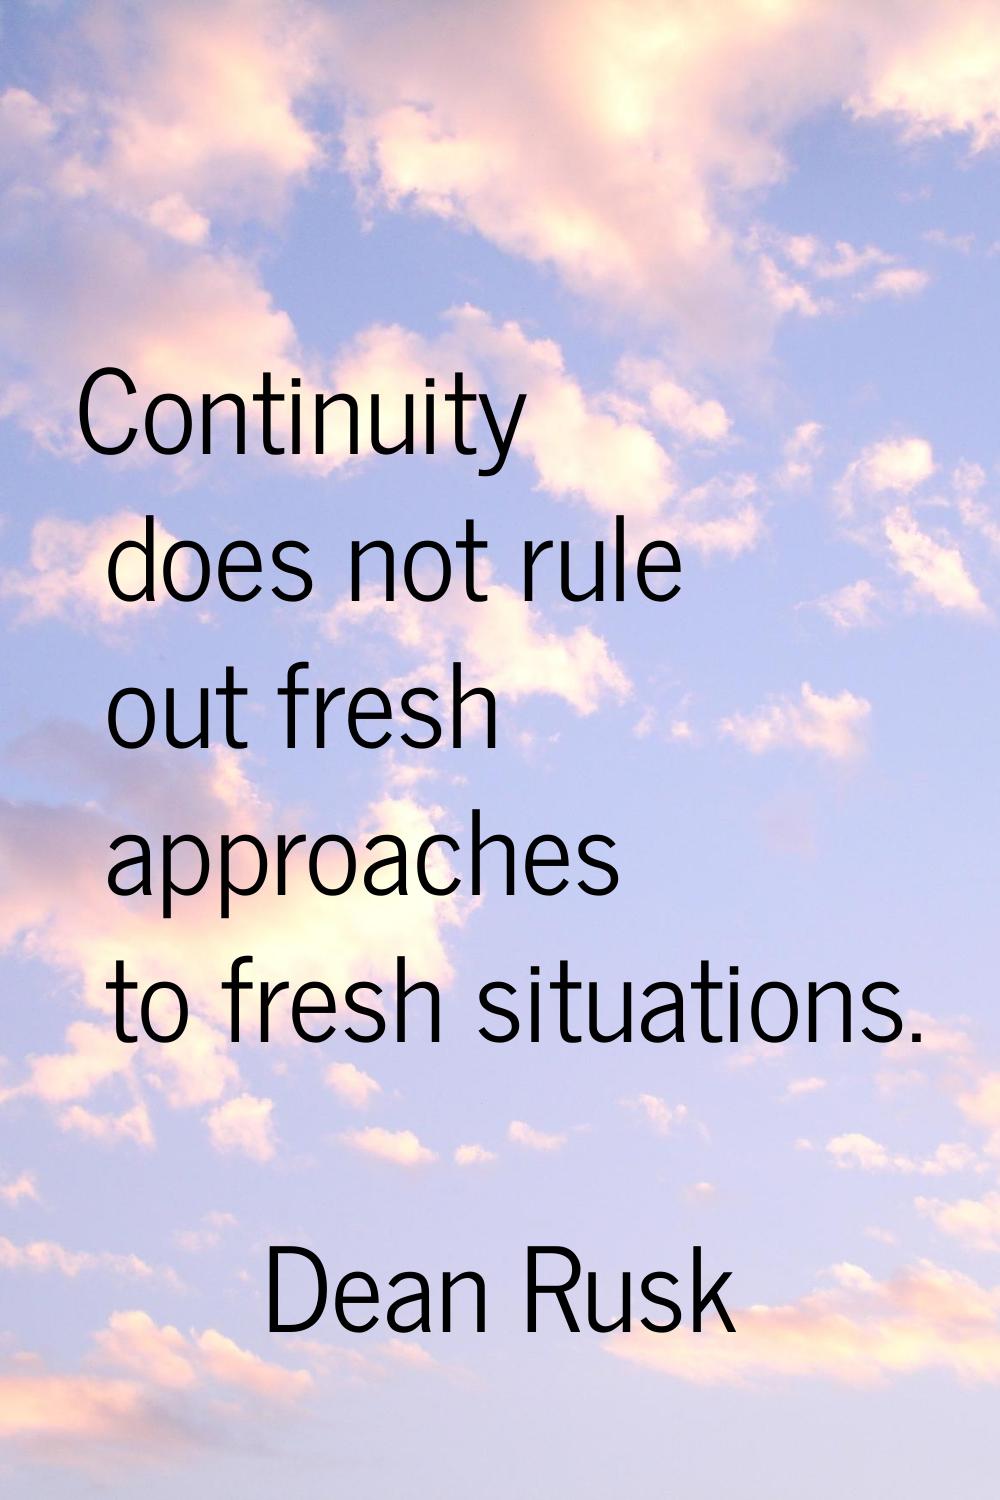 Continuity does not rule out fresh approaches to fresh situations.